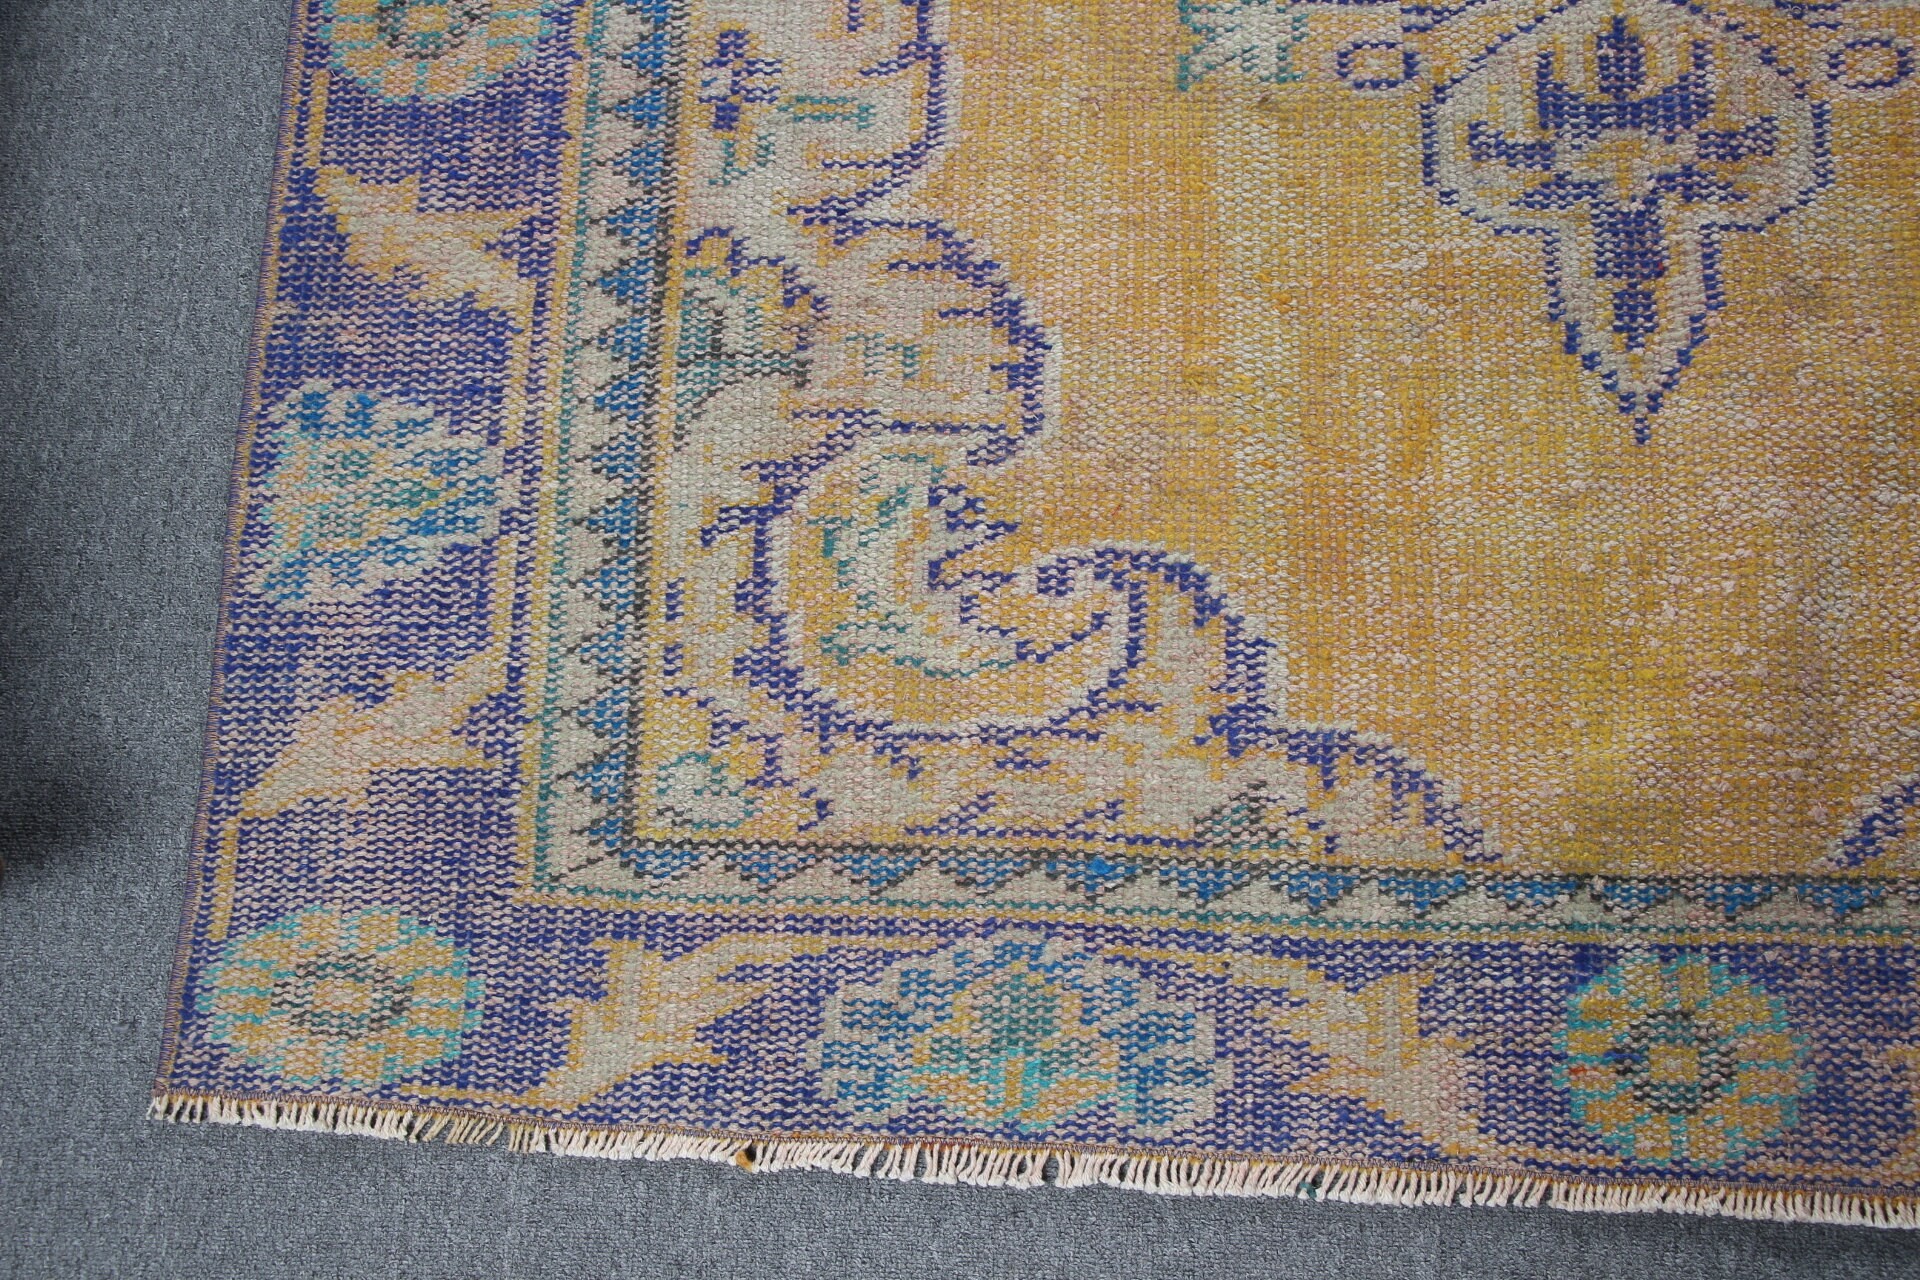 Rugs for Dining Room, Antique Rug, Yellow Bedroom Rugs, Dining Room Rugs, 5.2x8.6 ft Large Rug, Anatolian Rugs, Turkish Rug, Vintage Rugs